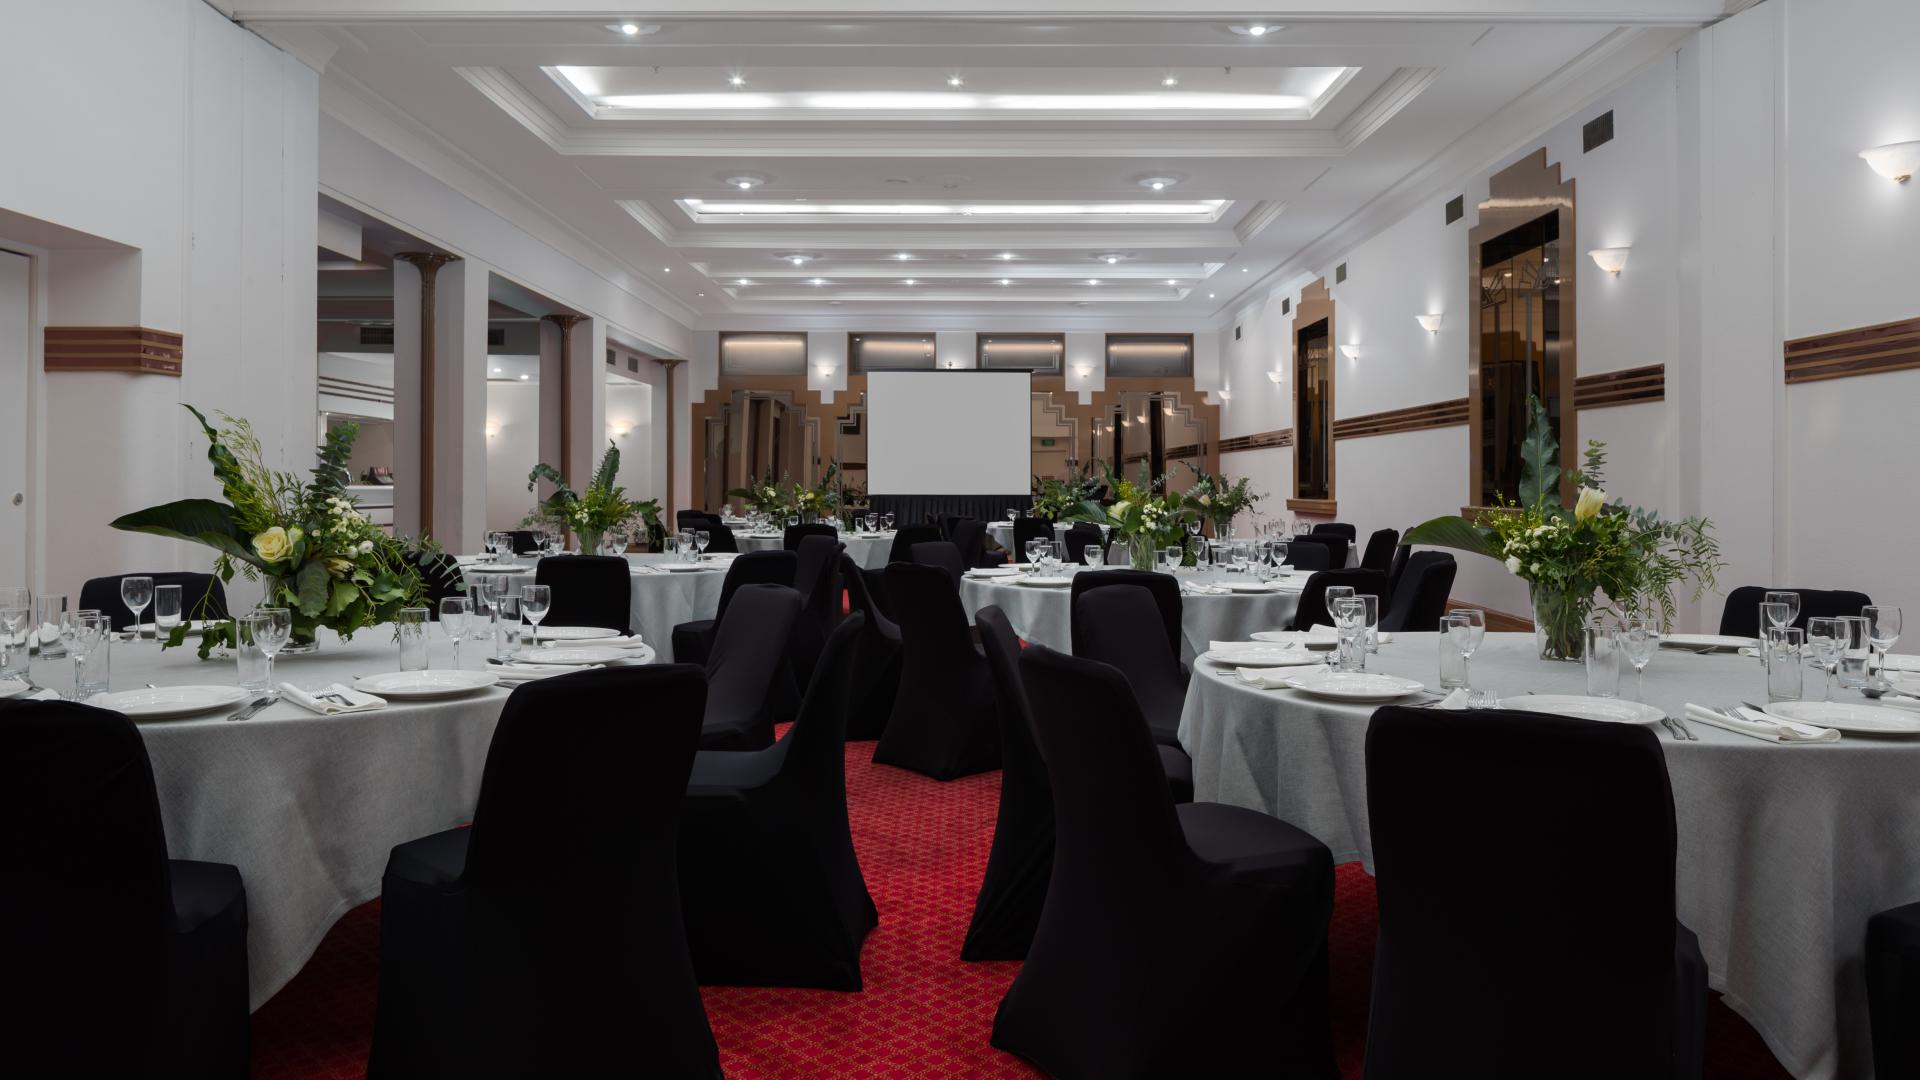 Banquet Halls for Hire in Melbourne